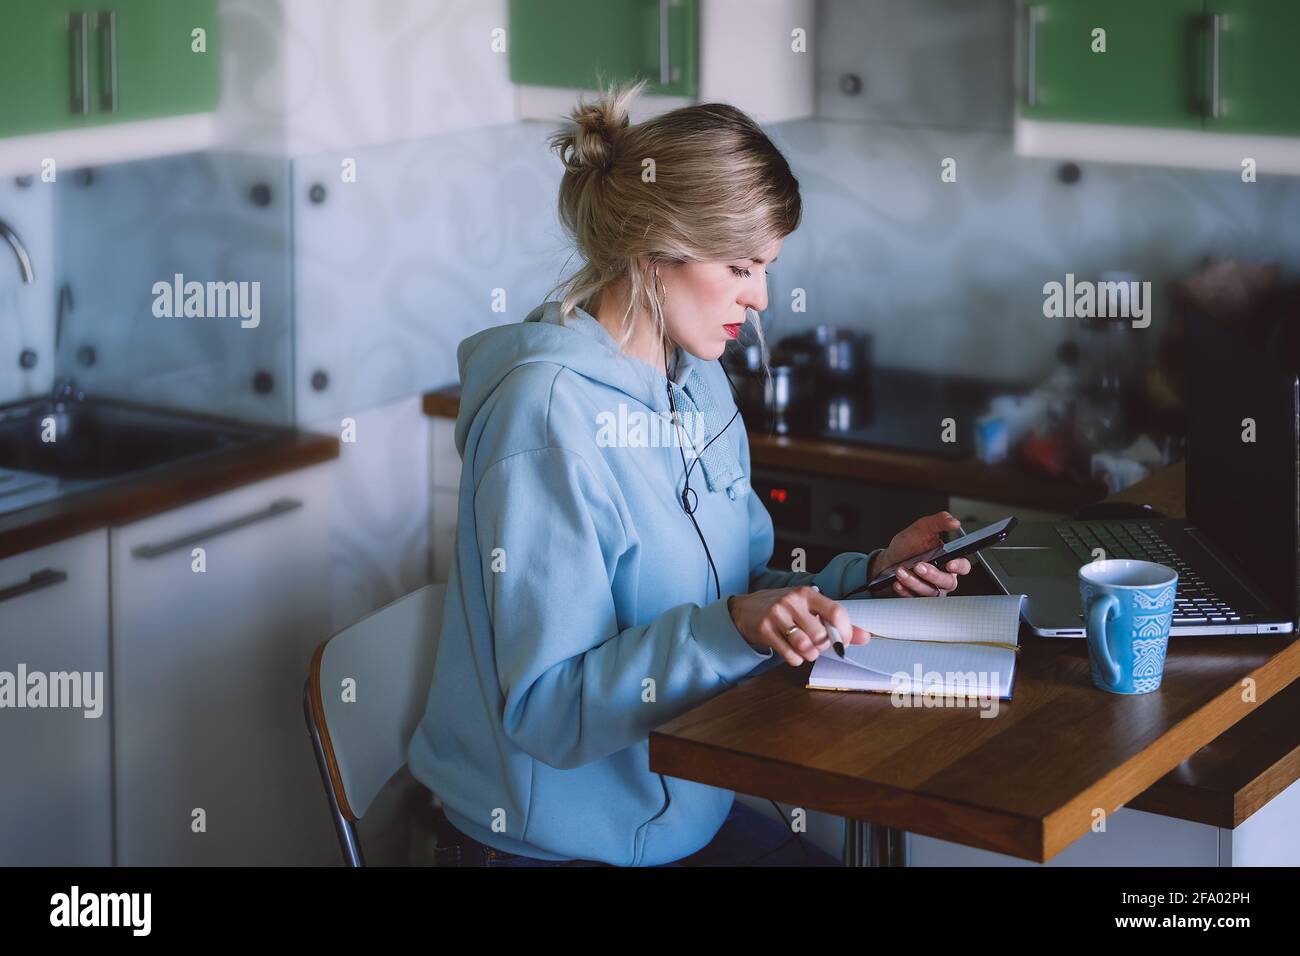 business woman looking at mobile phone while at home in the kitchen Stock Photo